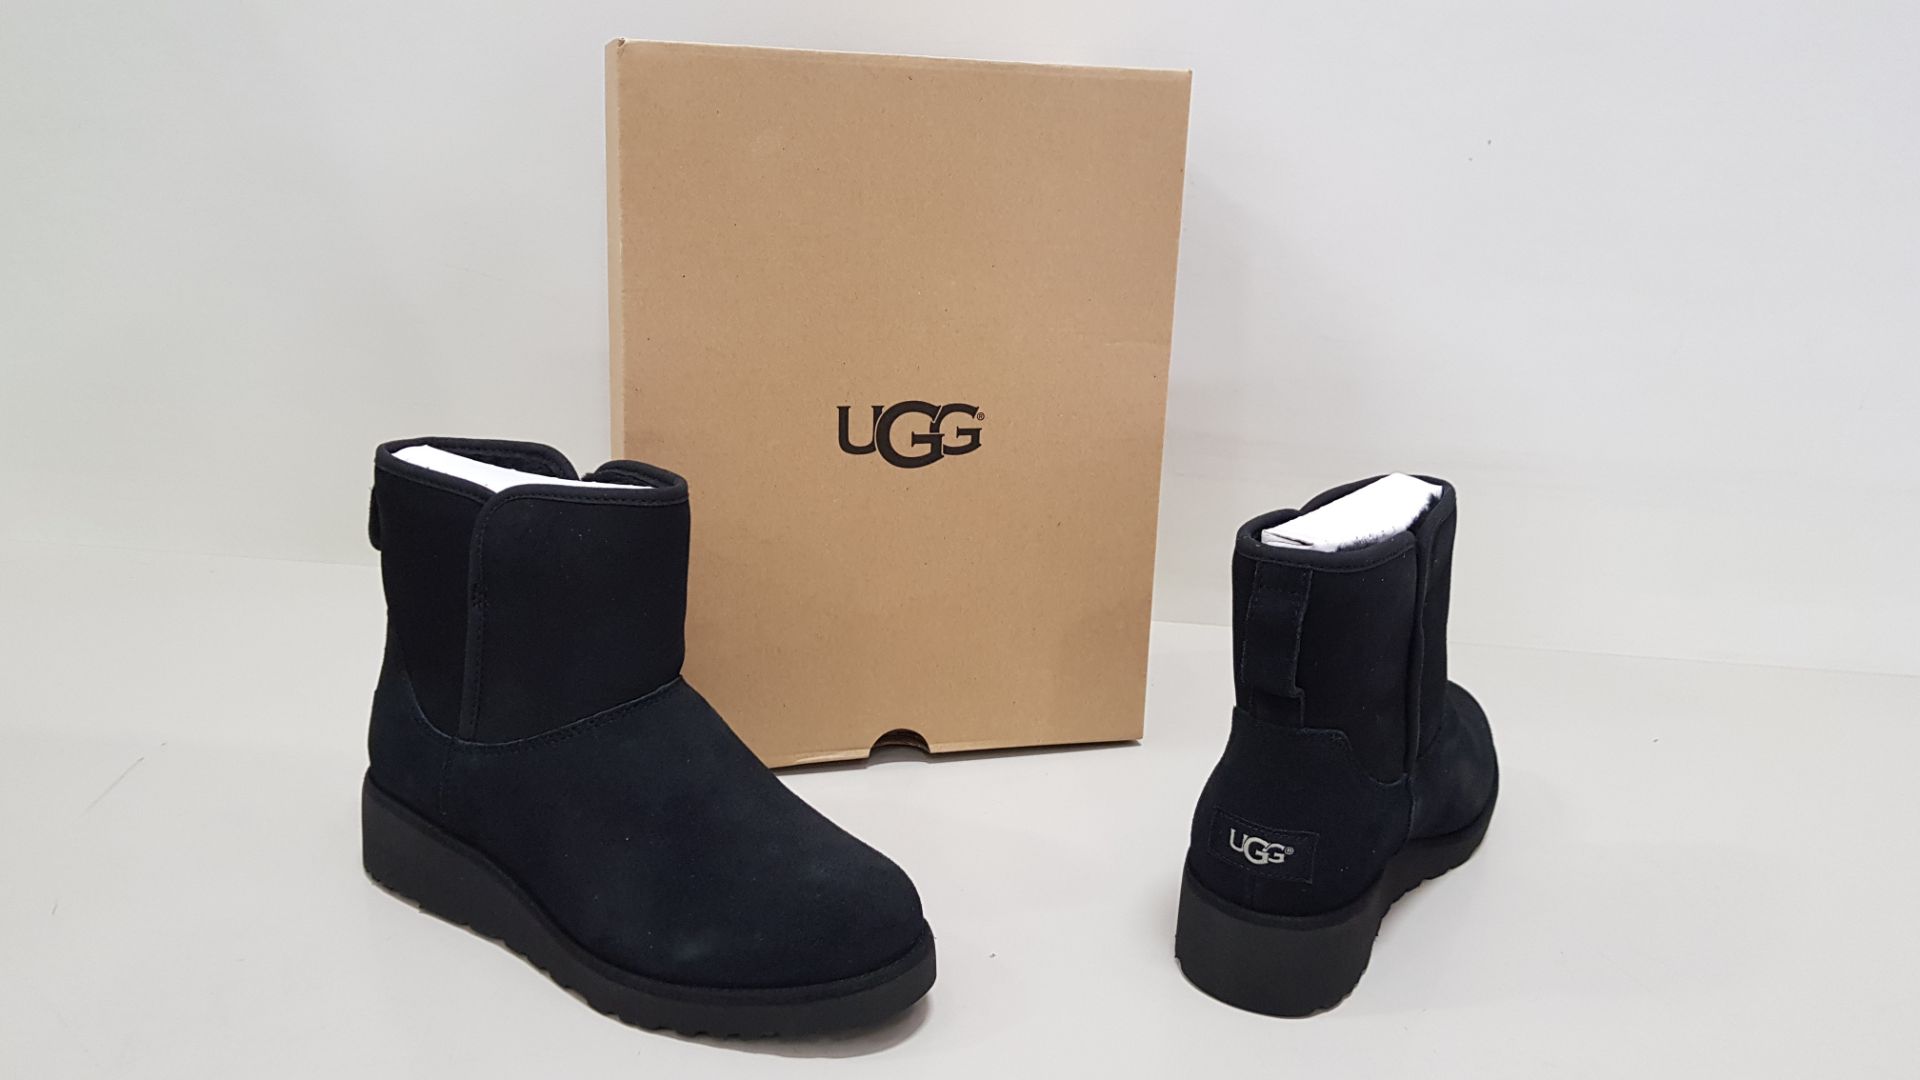 3 X BRAND NEW PAIRS OF UGG BOOTS W KRISTEN BLACK (CODE 1012497 W / BLK) UK SIZE 5.5